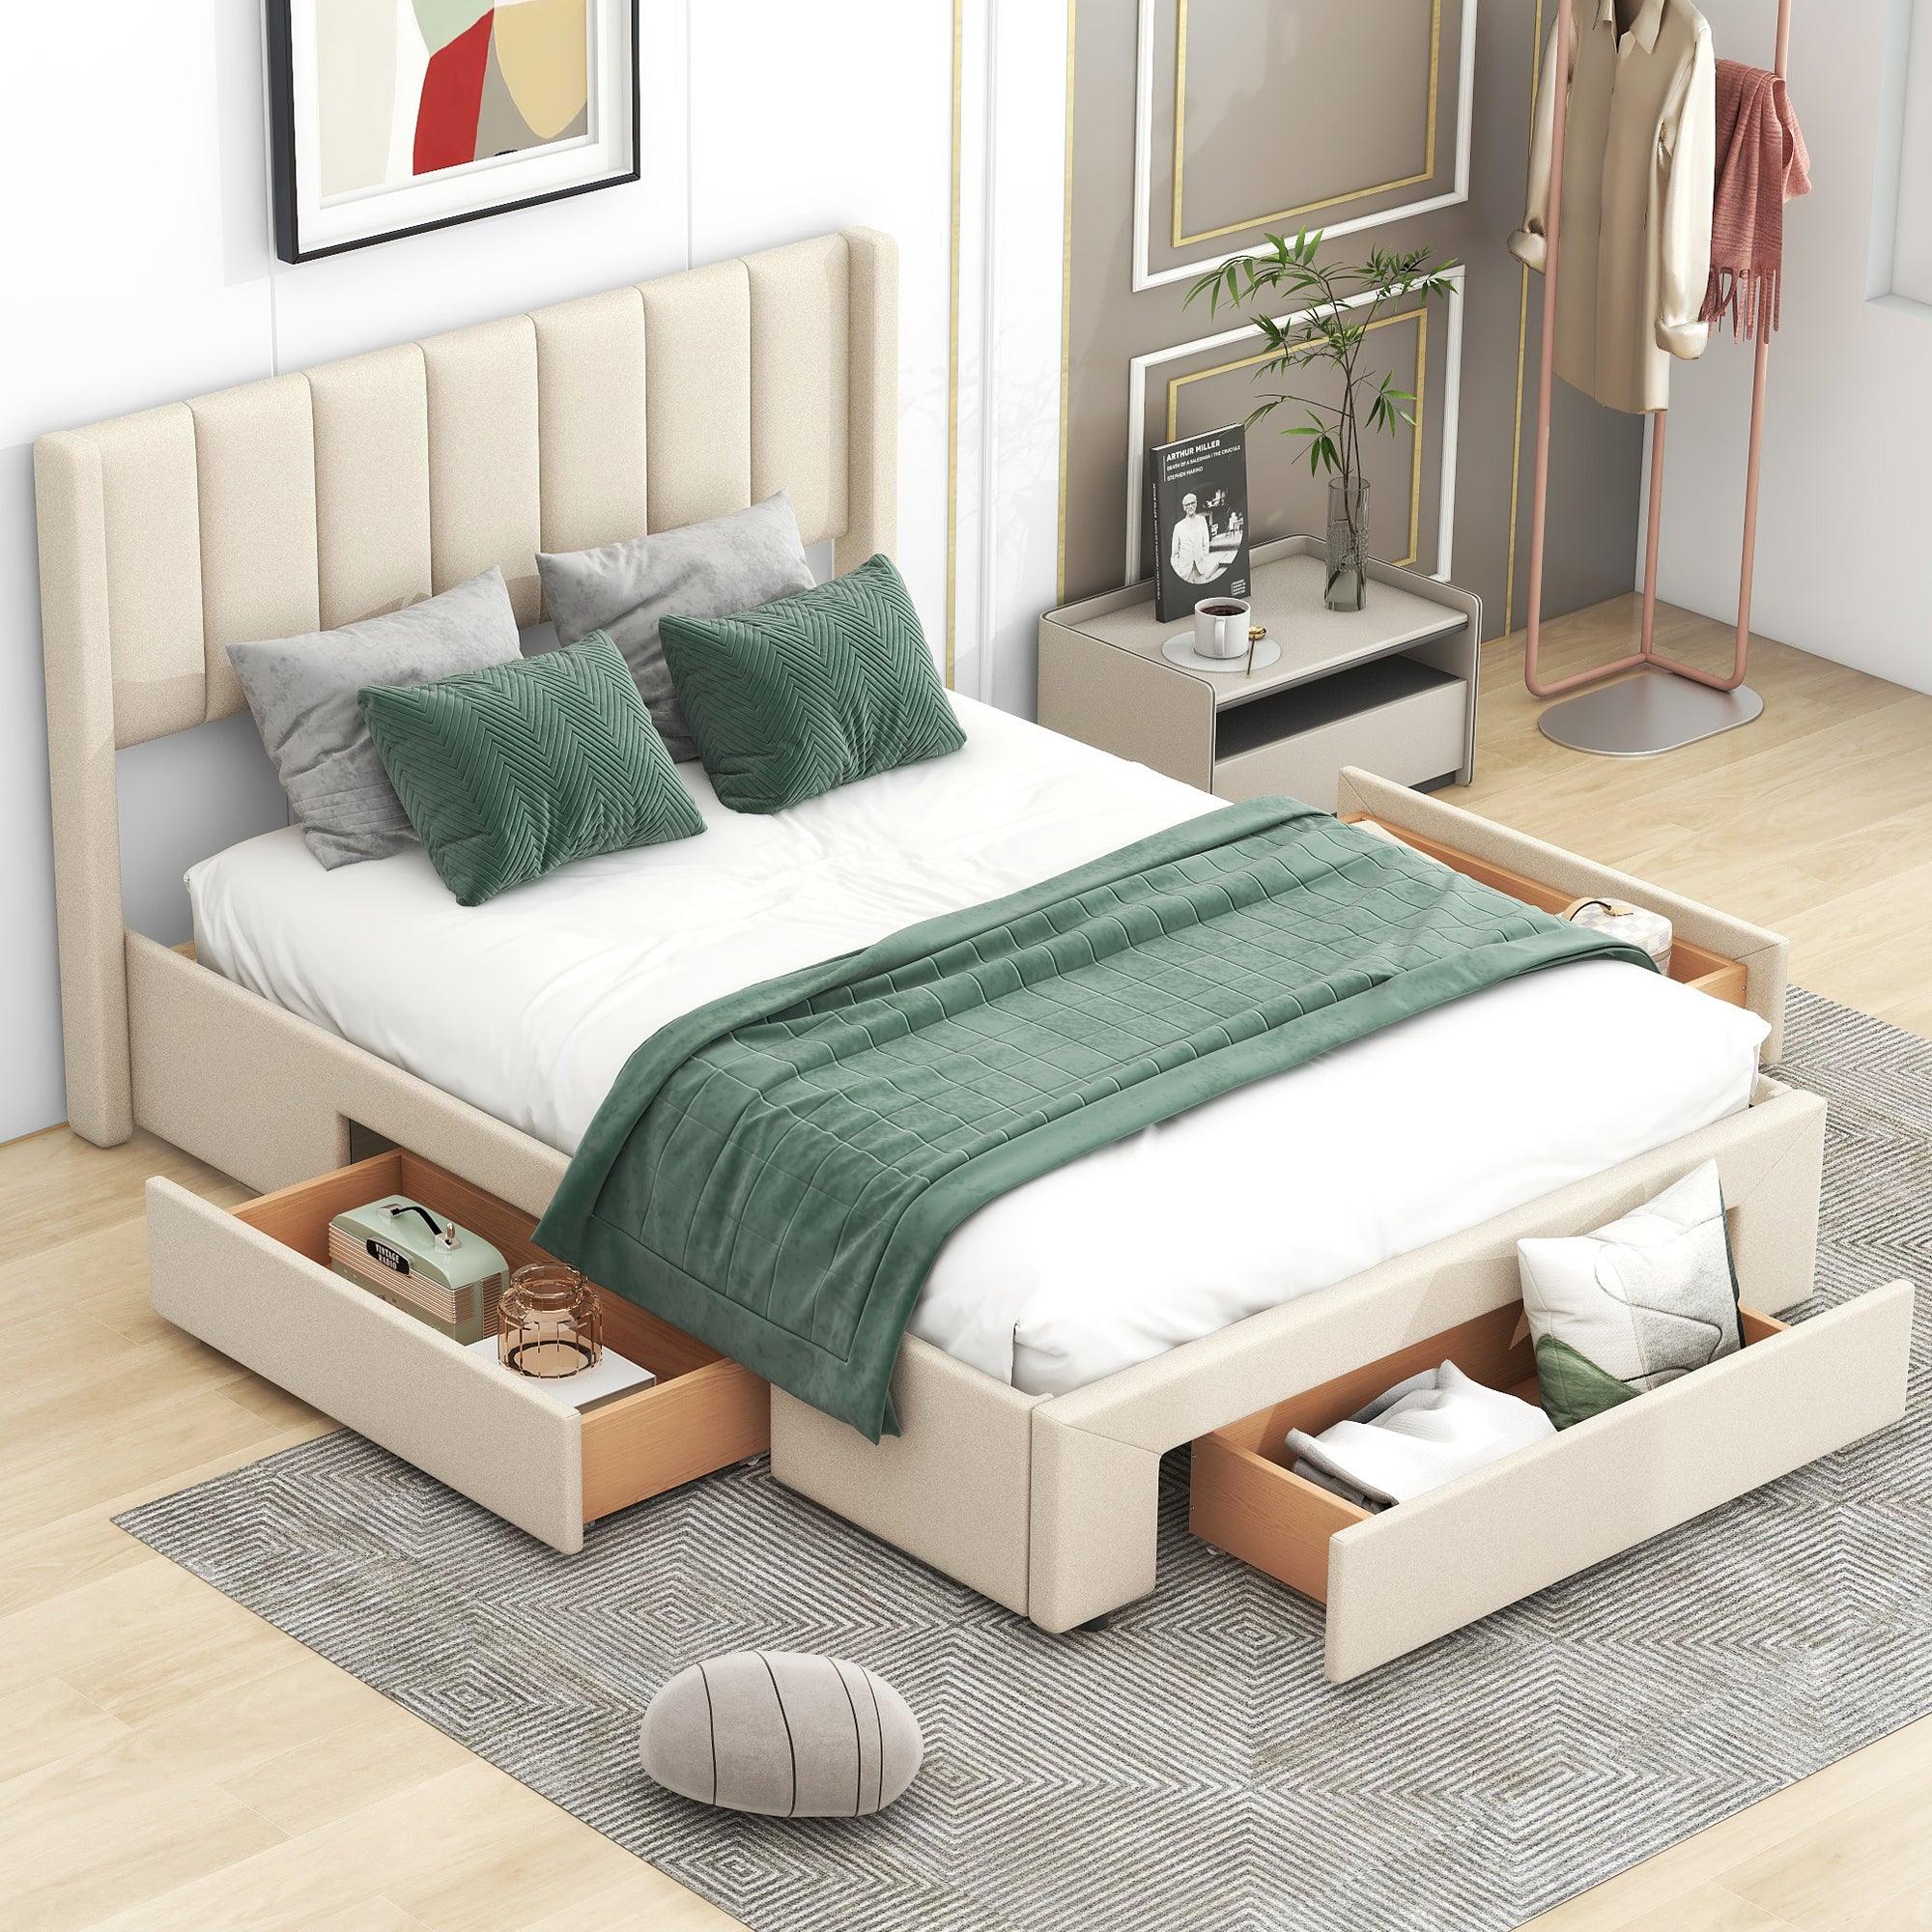 Full Size Upholstered Platform Bed with One Large Drawer in the Footboard and Drawer on Each Side, Beige